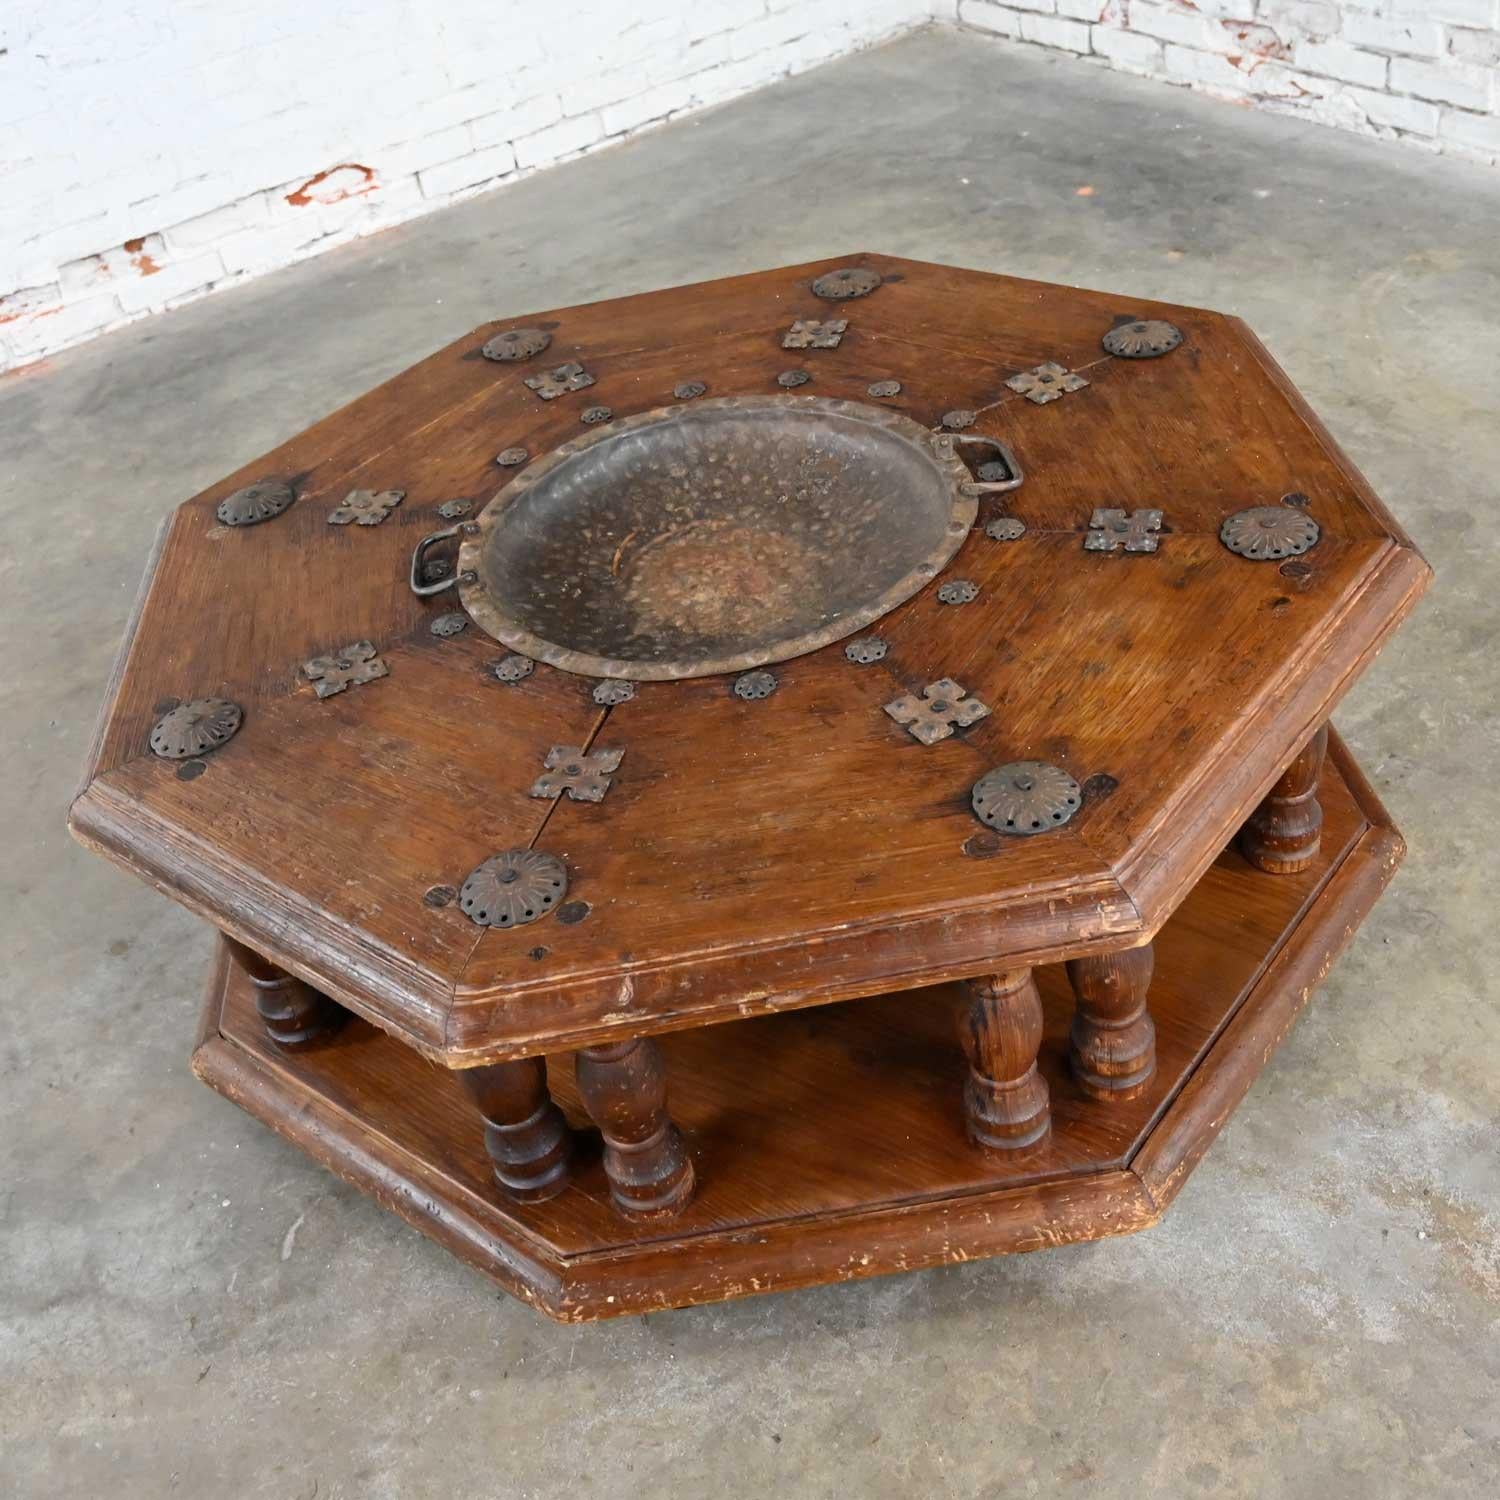 Fabulous Spanish Colonial Revival rustic distressed 2-tiered octagon Brazier coffee table with hand hammered steel rustic center bowl and tabletop details style of Artes De Mexico. Beautiful condition, keeping in mind that this is vintage and not